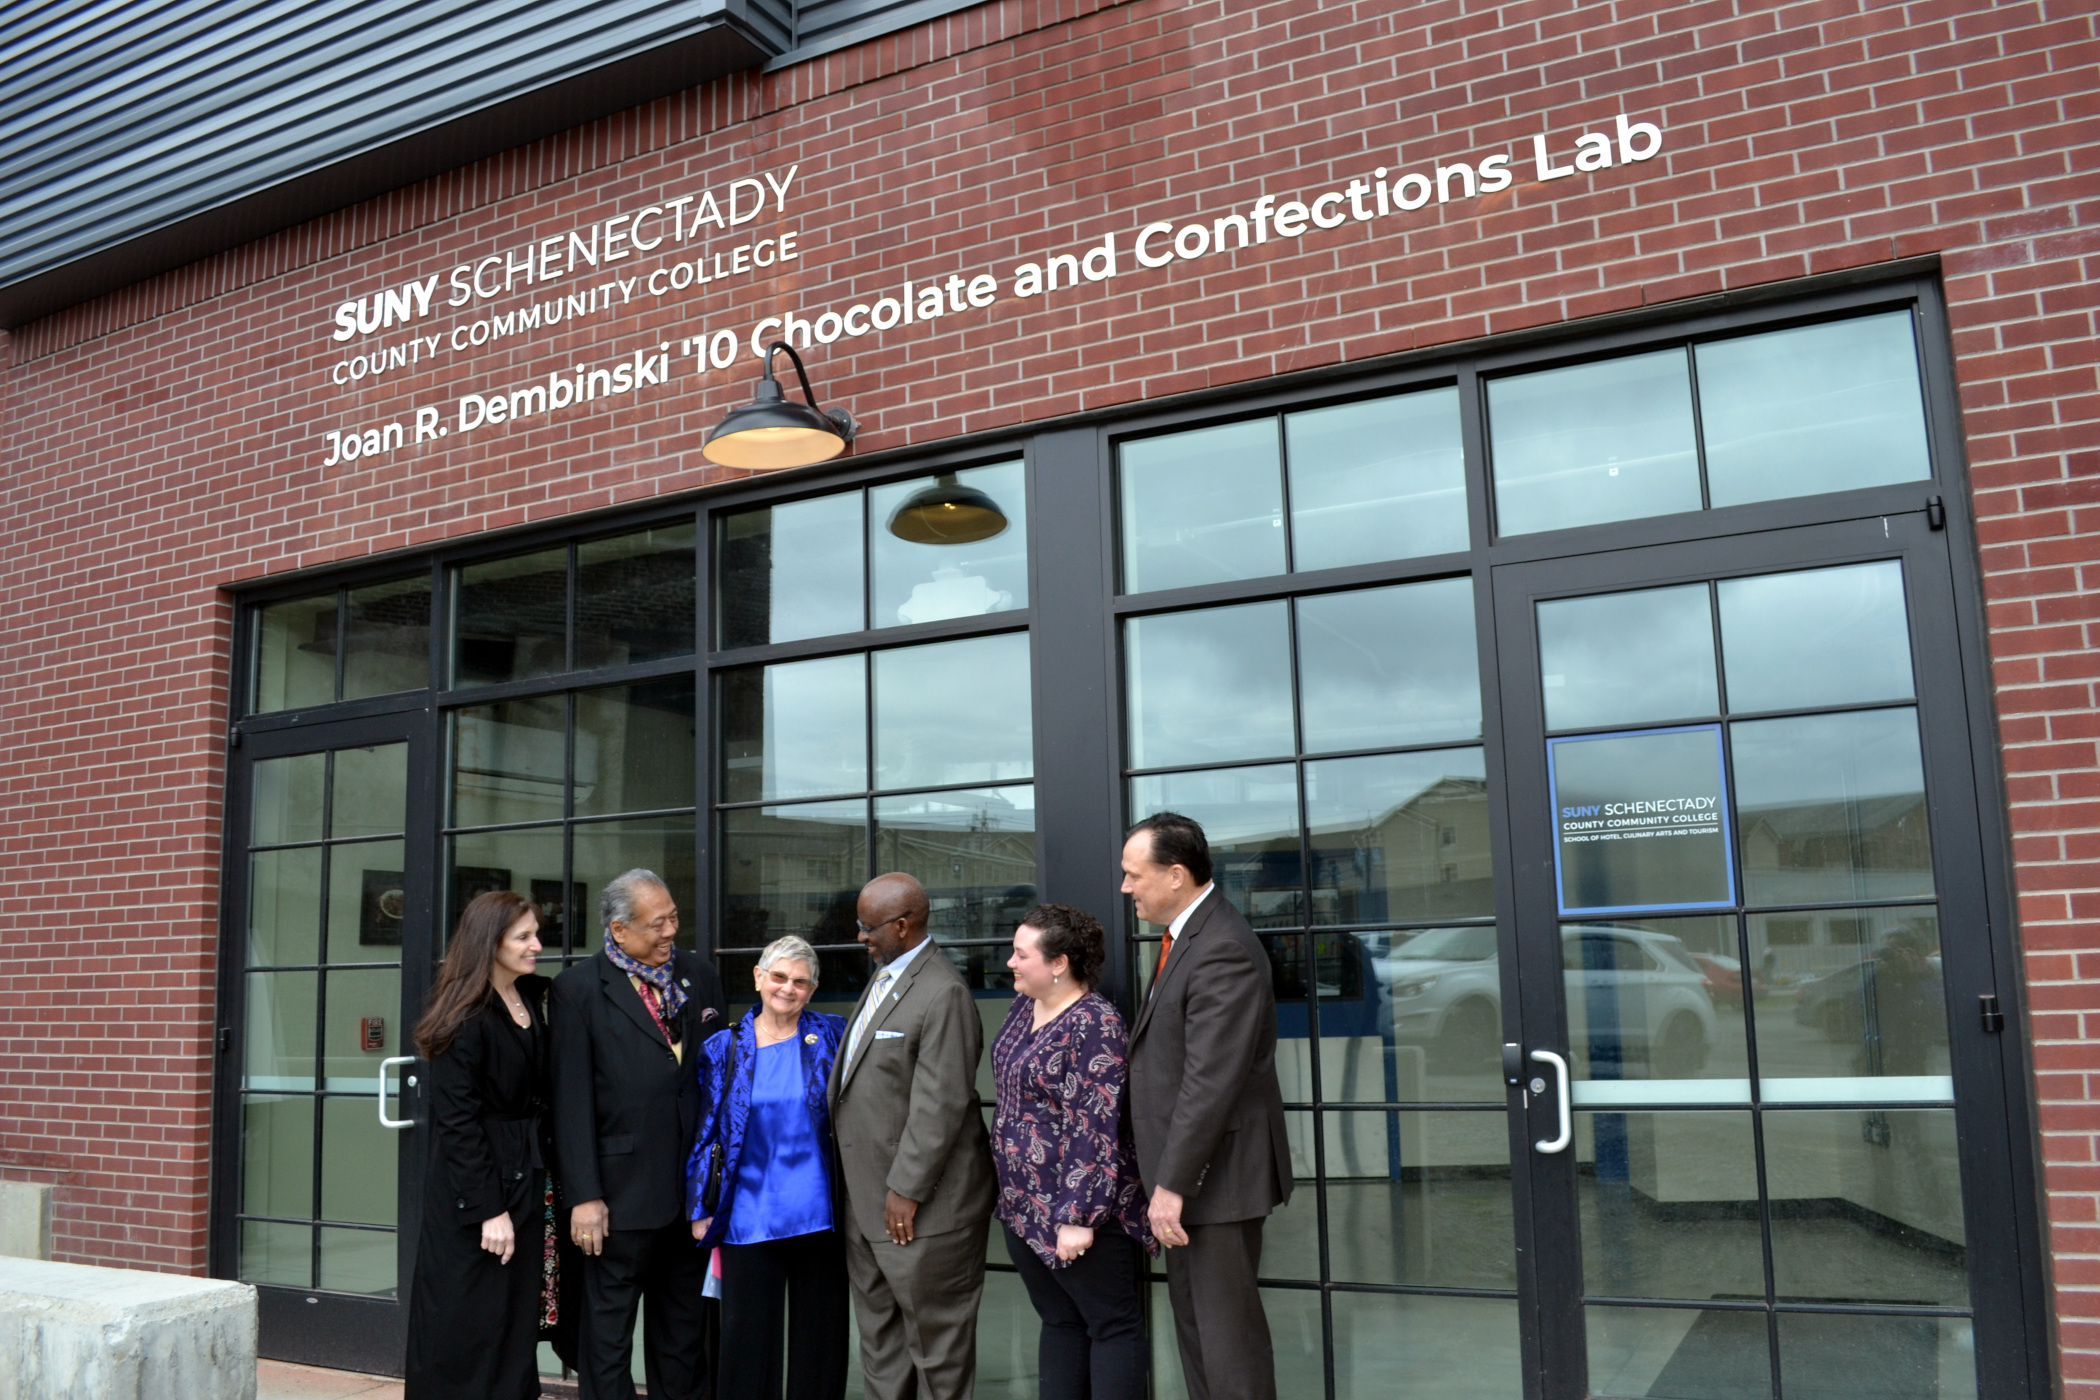 Joan Dembinski and college officials standing outside lab with her name on building